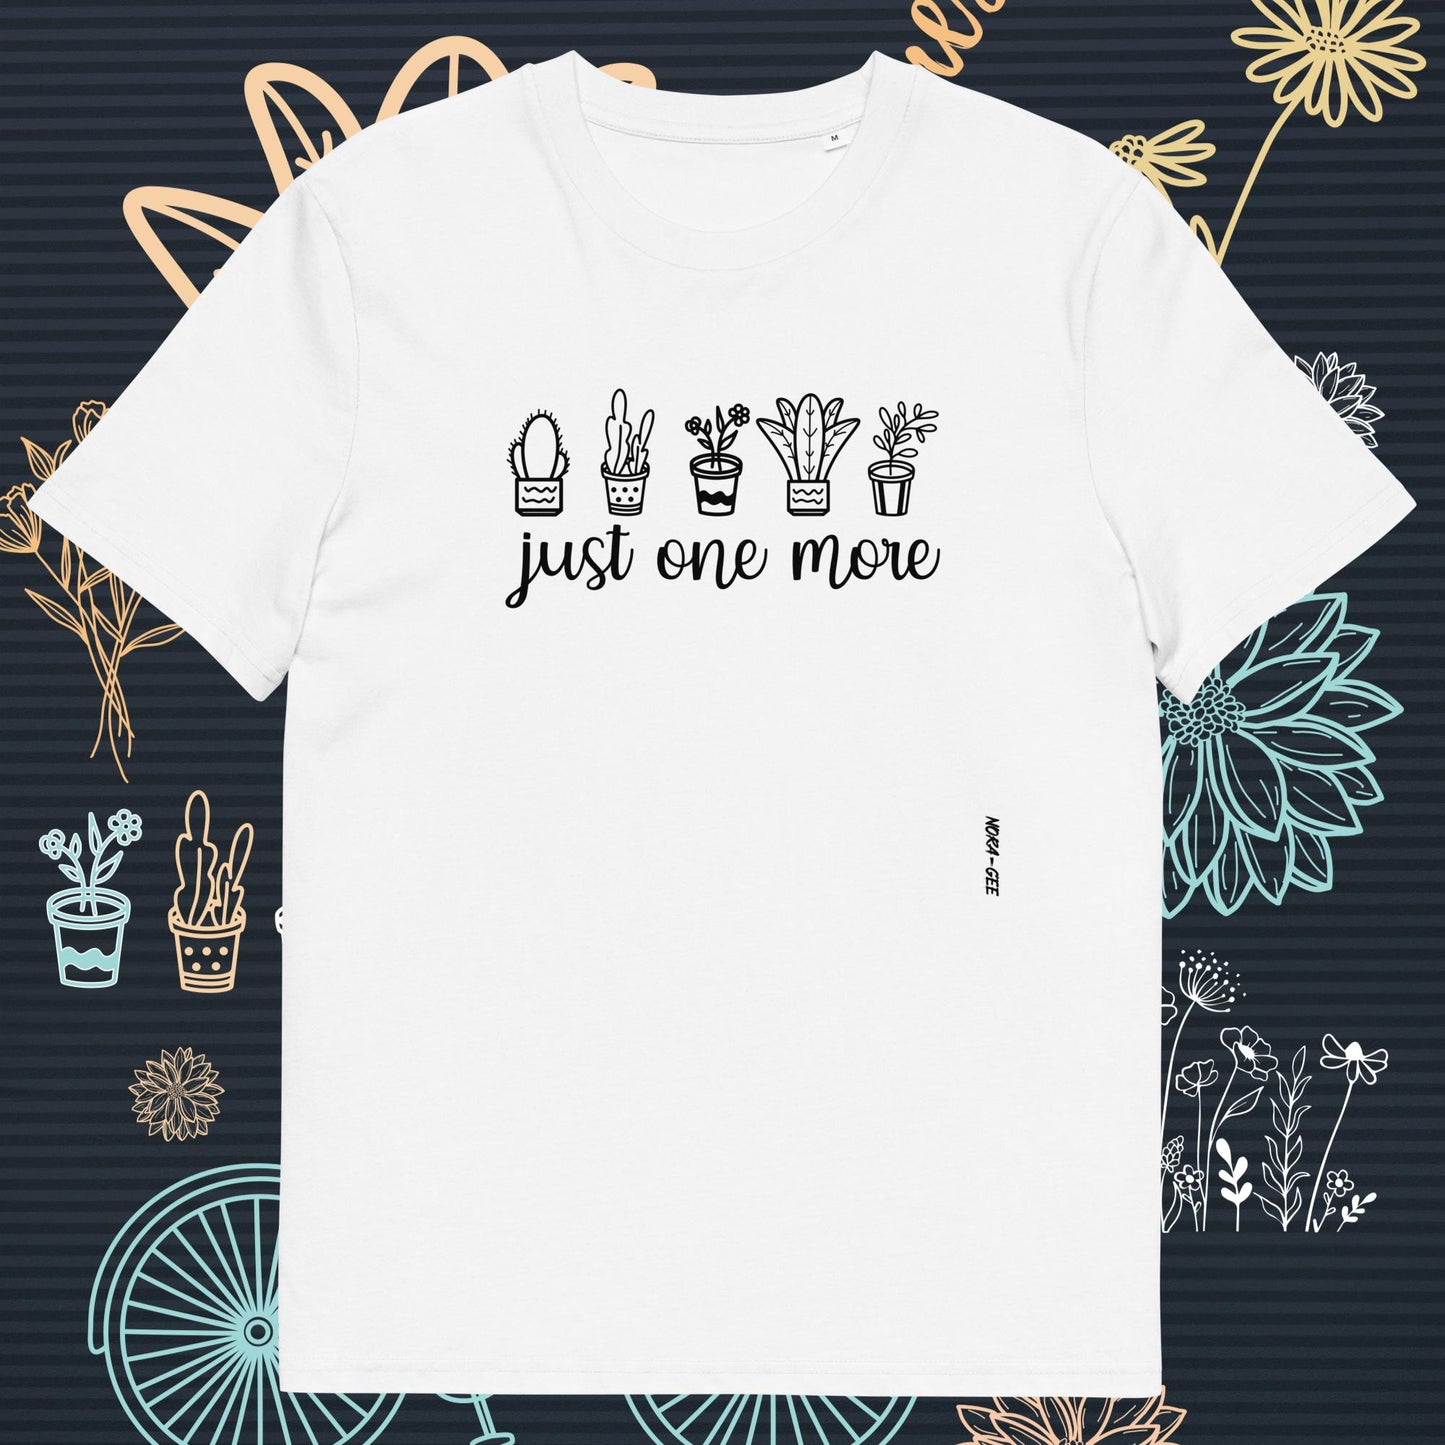 Unisex t-shirt: Just one more